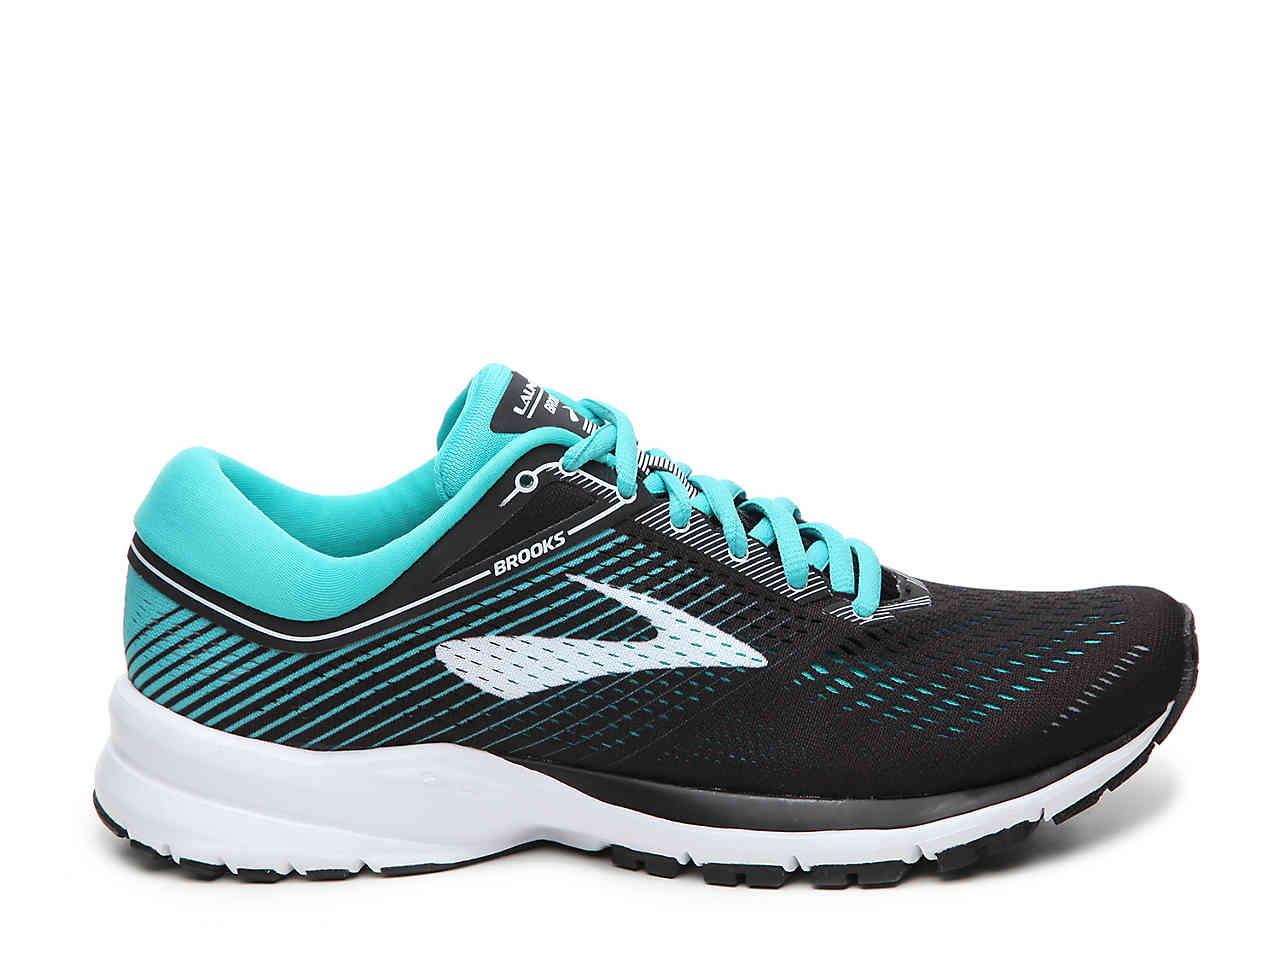 Brooks Synthetic Launch 5 Running Shoe in Black/Grey/Teal (Gray) - Lyst